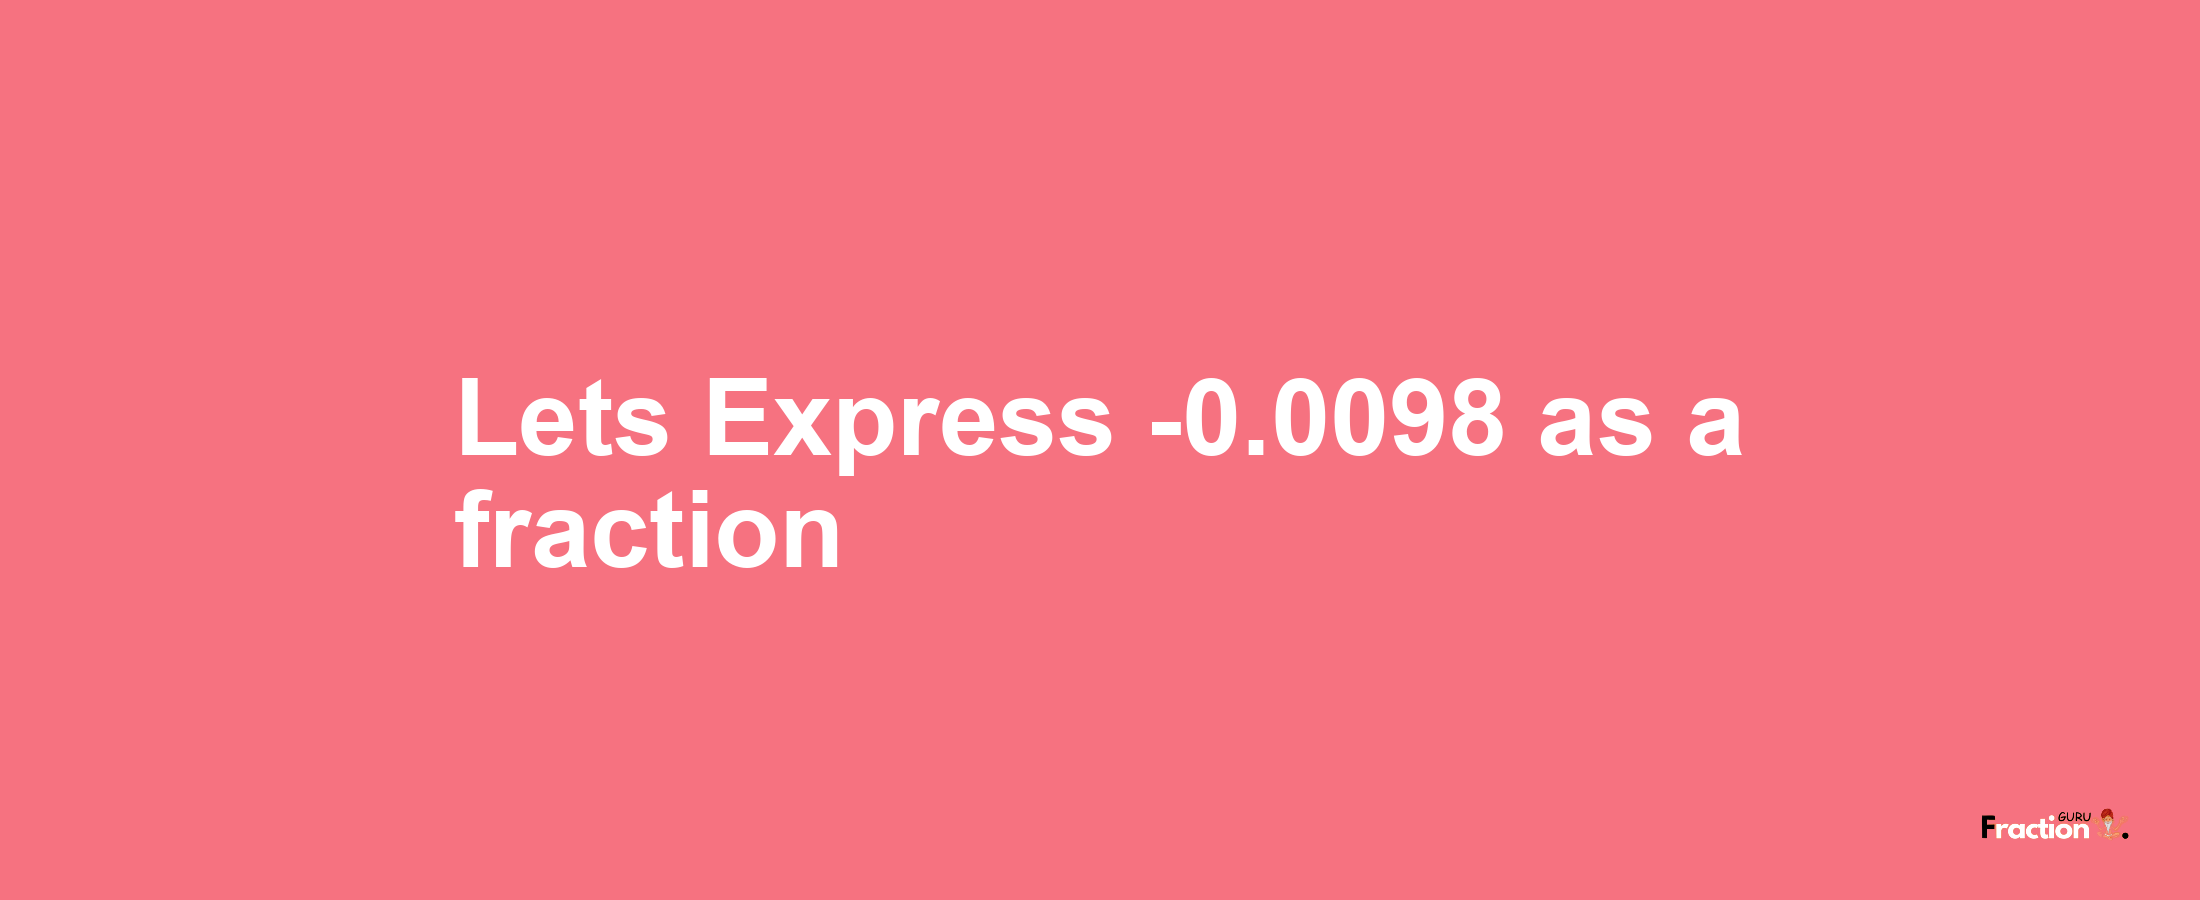 Lets Express -0.0098 as afraction